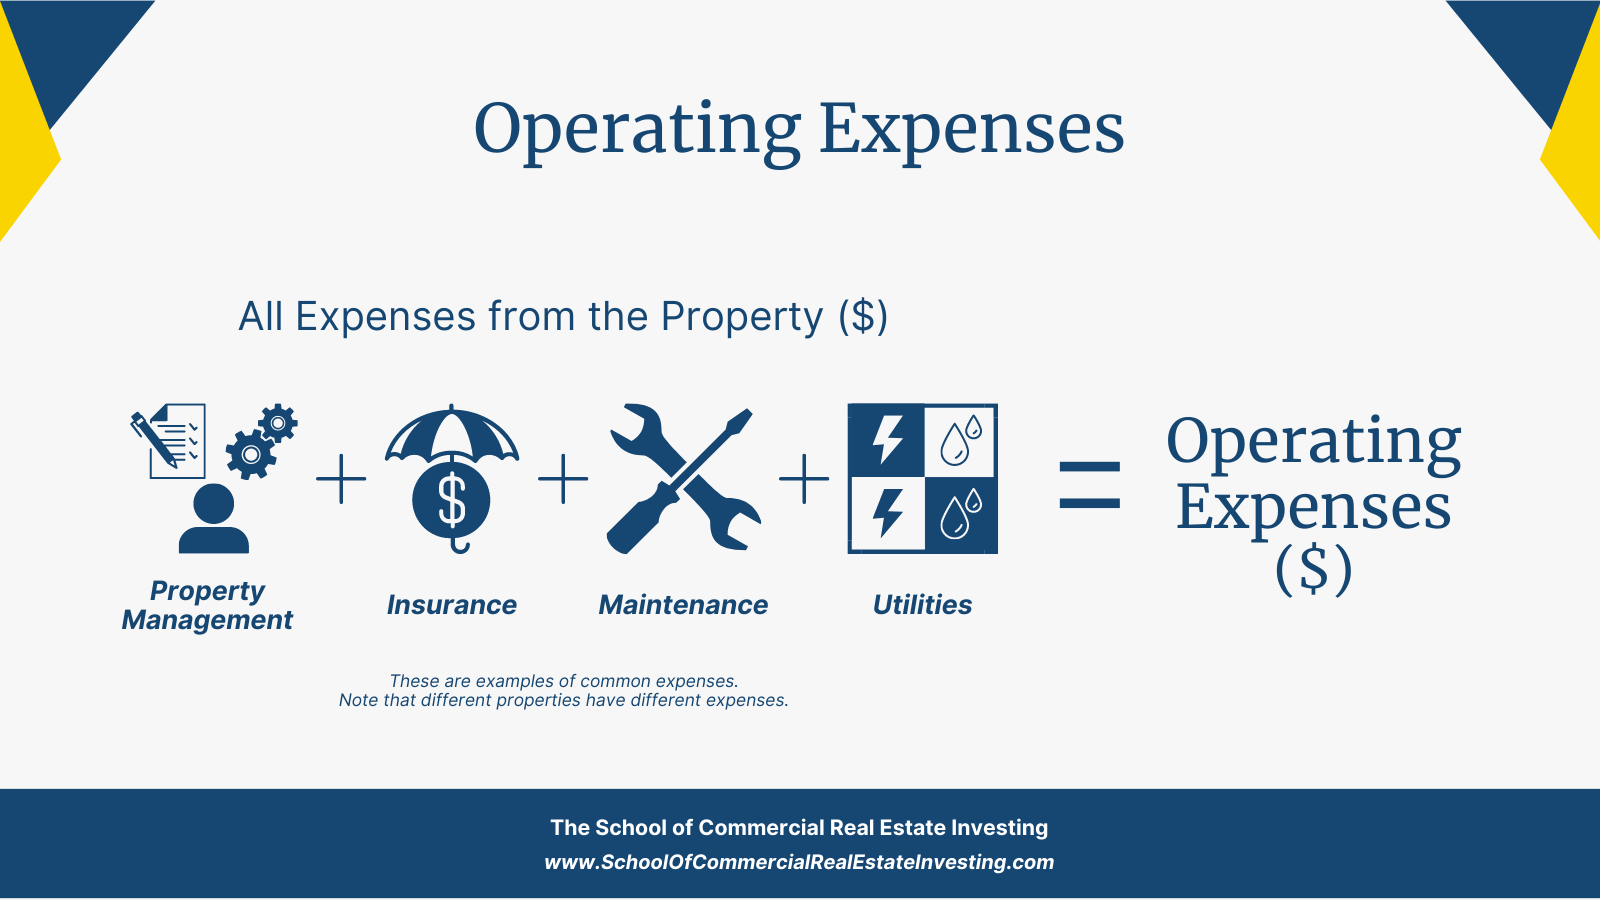 Calculate Operating Expenses by adding all expenses necessary for operating the property.